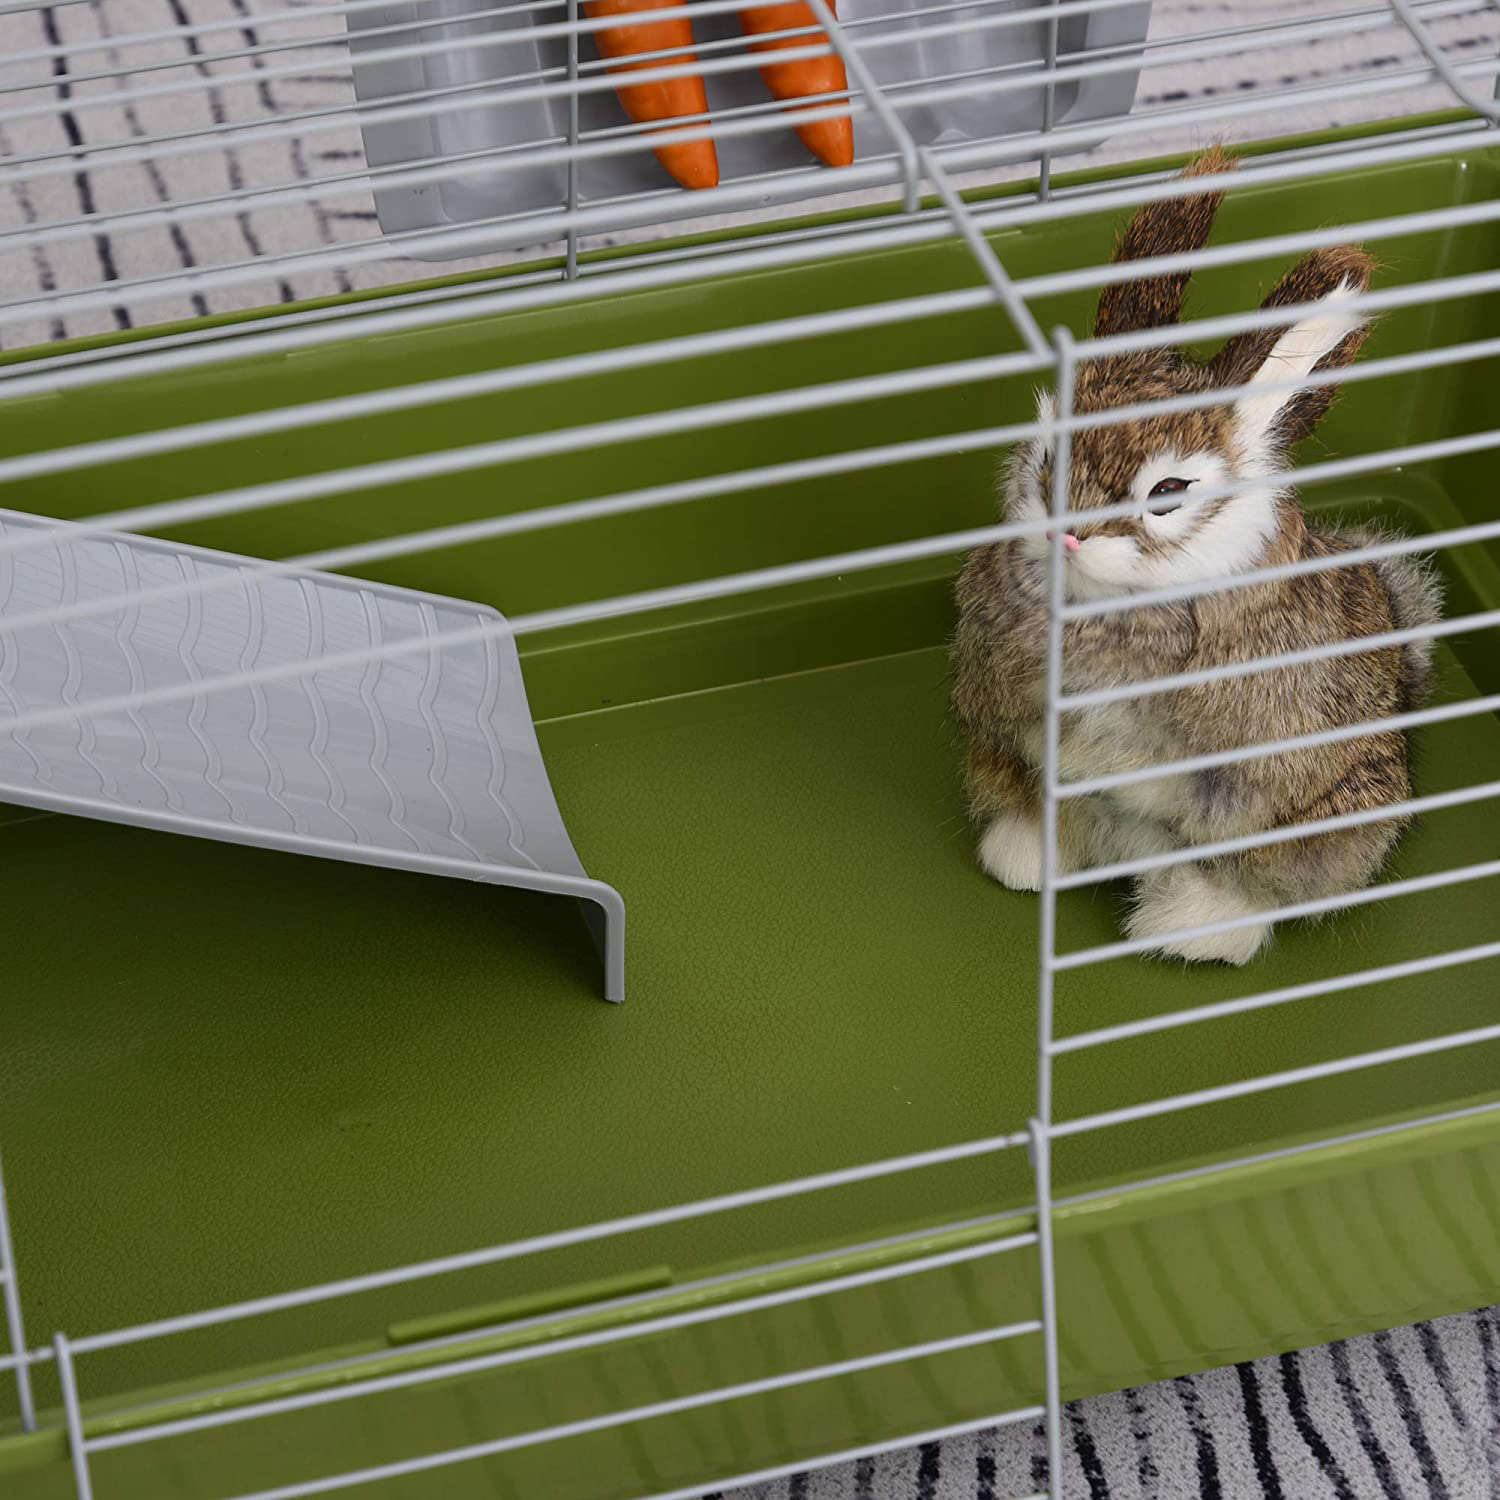 Pawhut Small Animal Cage Rabbit Chinchilla Guinea Pig Hutch Pet Play House with Platform, Ramp, Food Dish, Water Bottle, Hay Feeder